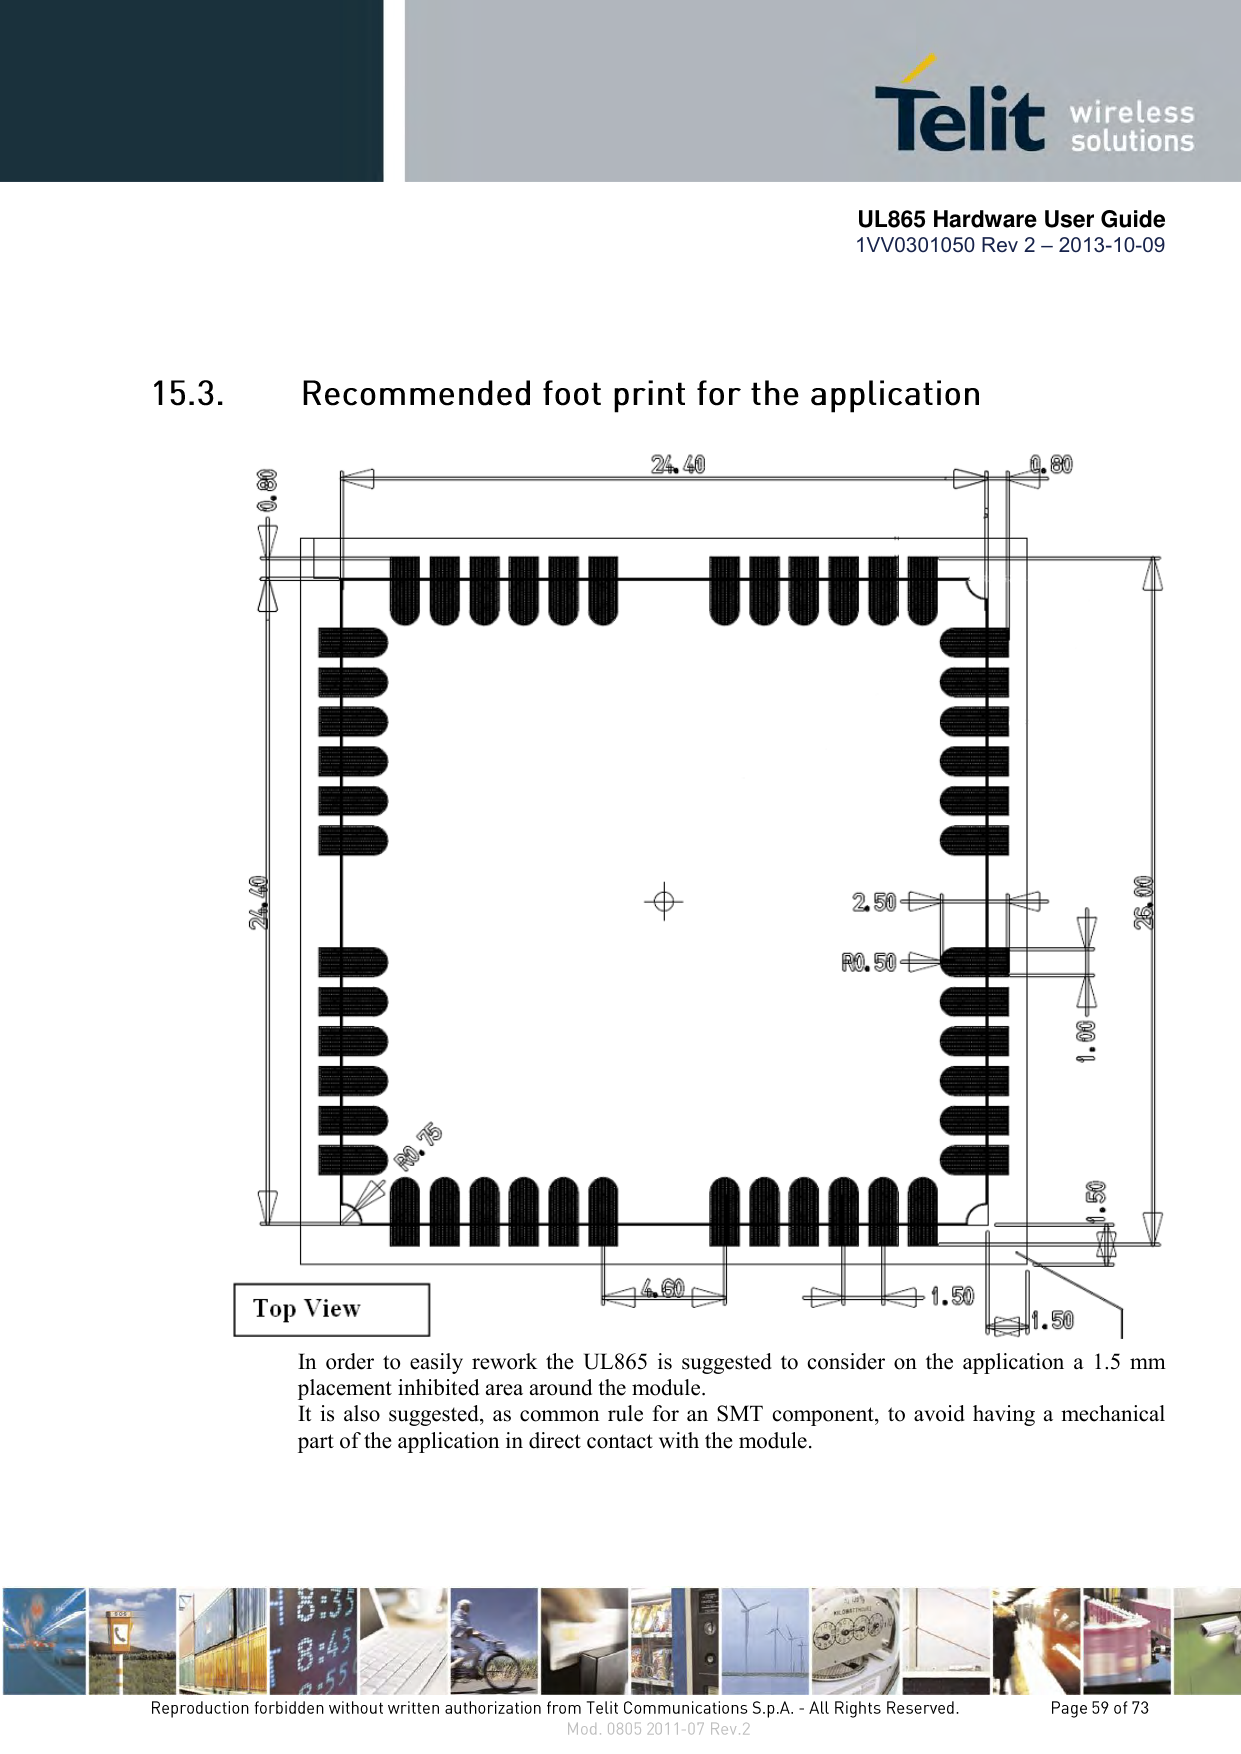       UL865 Hardware User Guide 1VV0301050 Rev 2 – 2013-10-09     In order  to easily rework  the  UL865 is  suggested  to  consider on the application a  1.5 mm placement inhibited area around the module. It is also suggested, as common rule for an SMT component, to avoid having a mechanical part of the application in direct contact with the module.     